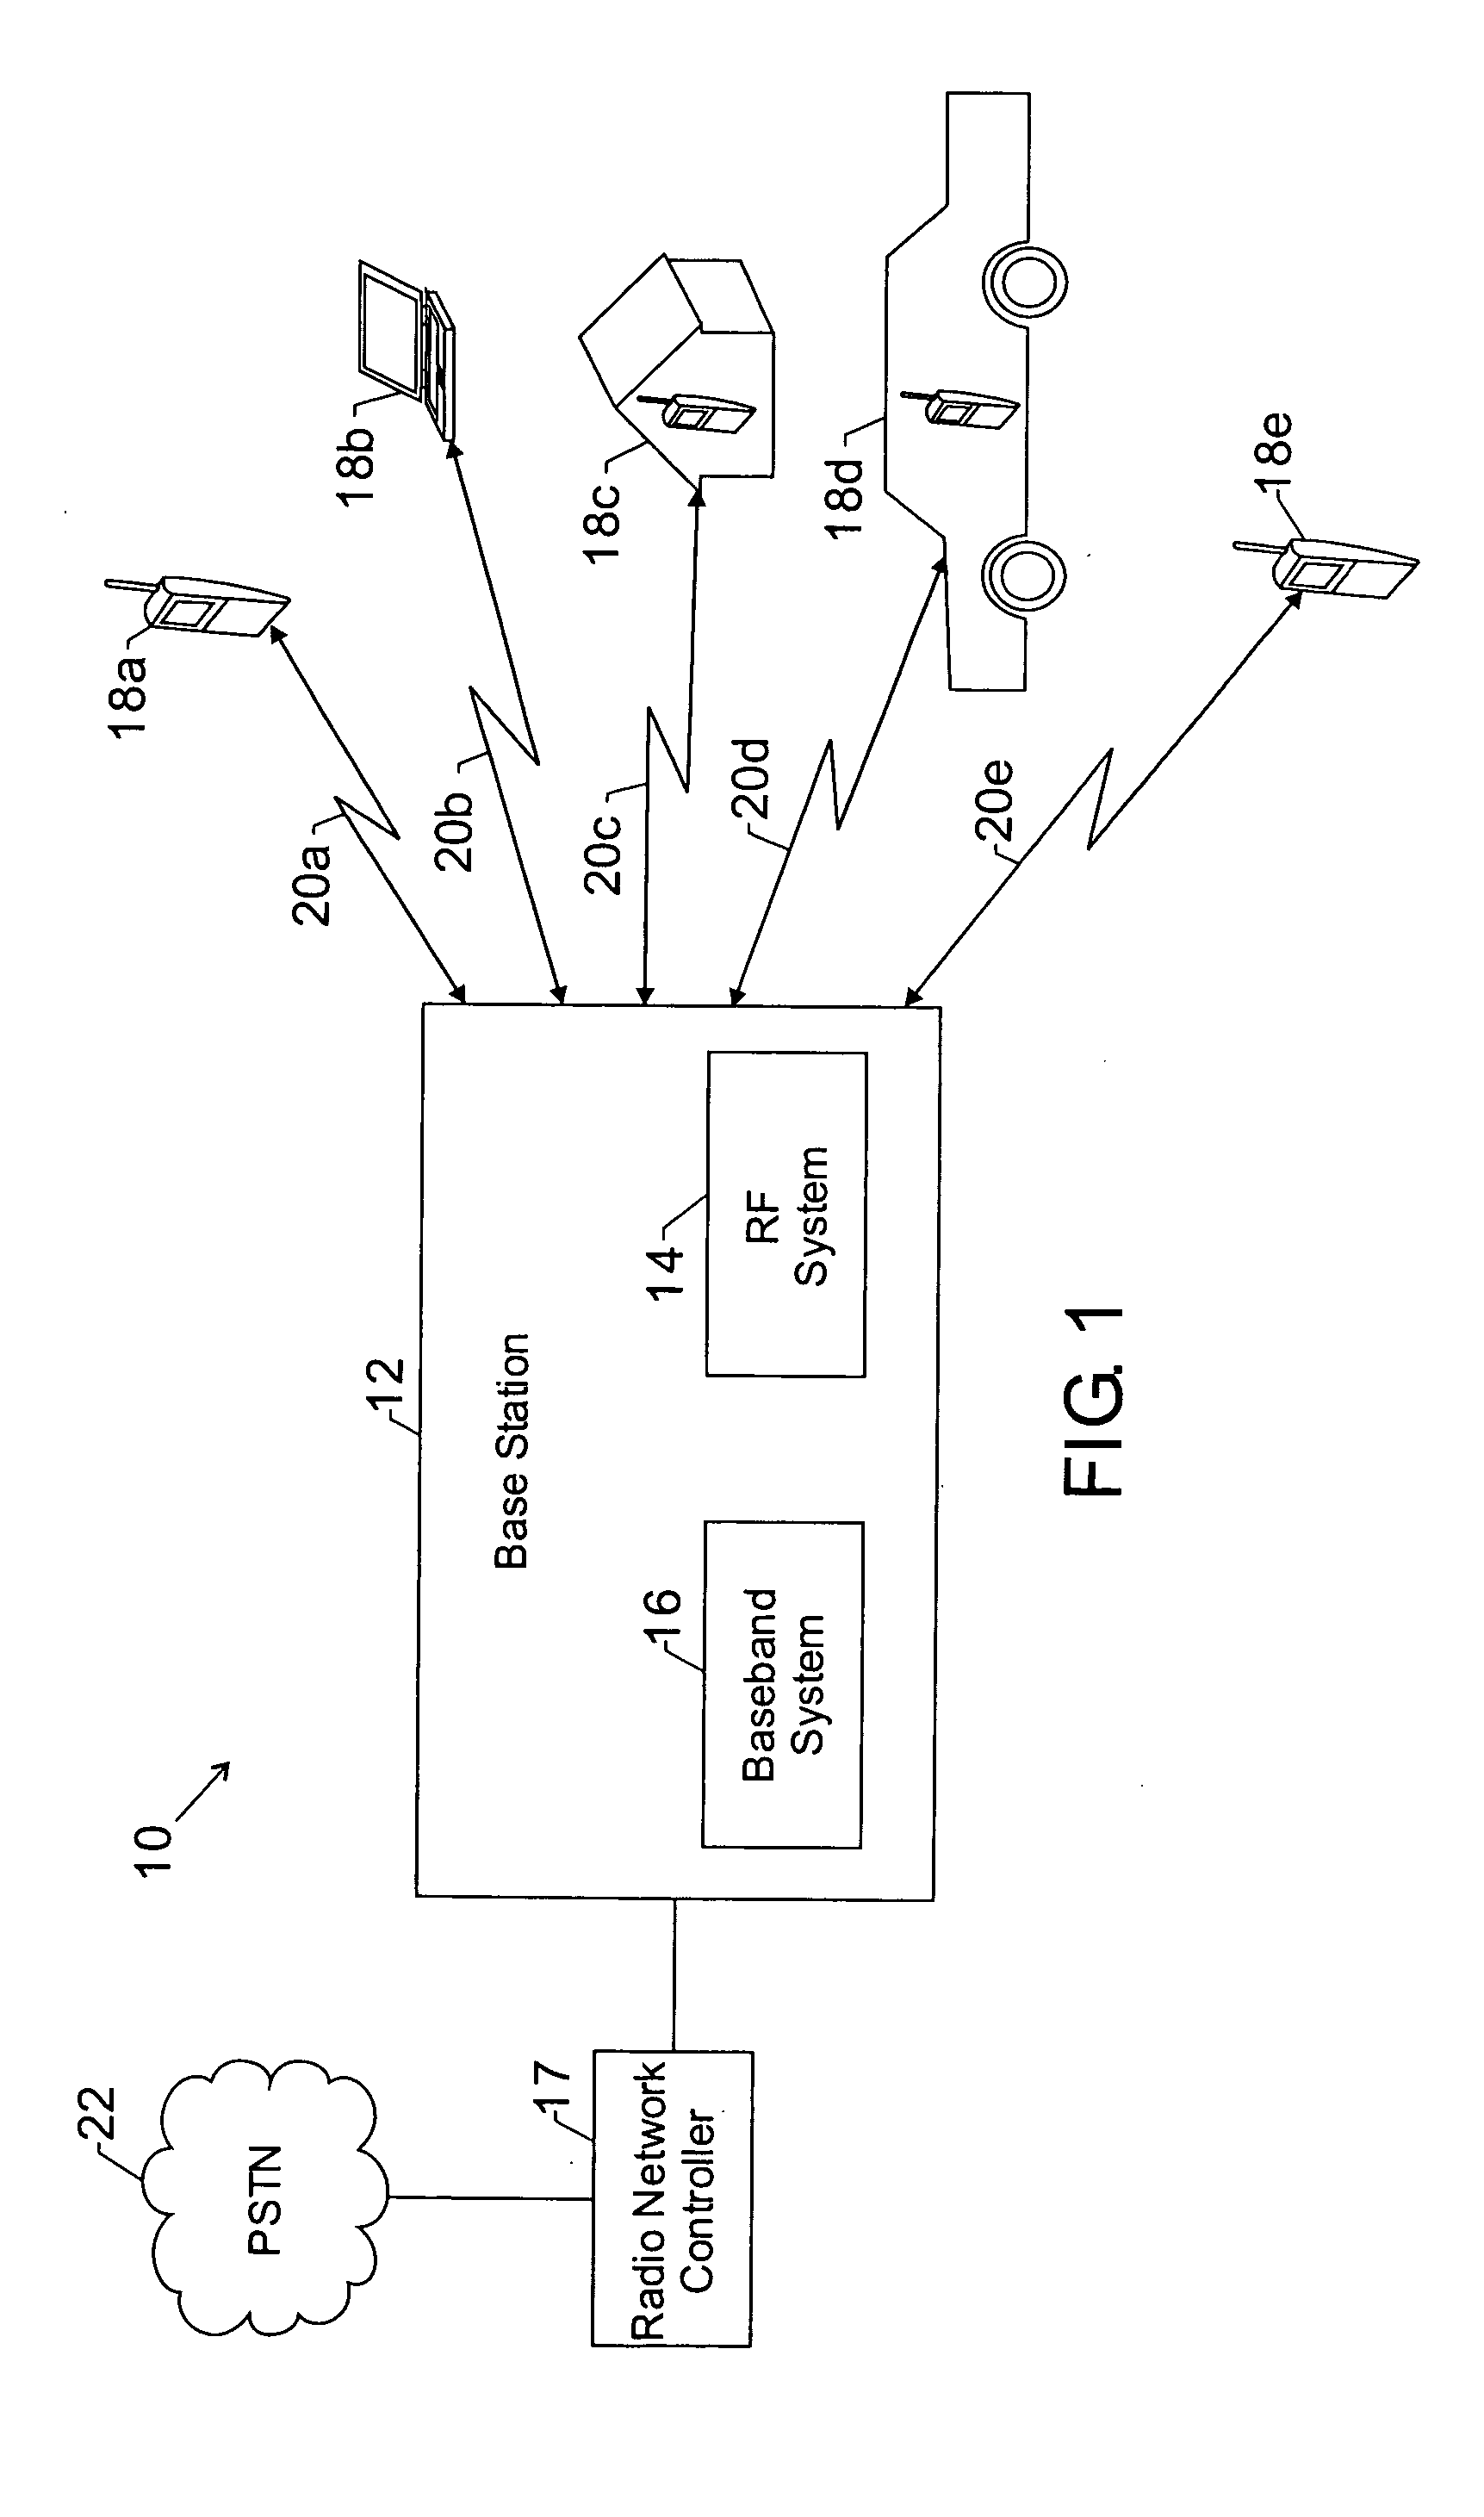 Power sharing process in cellular network architecture